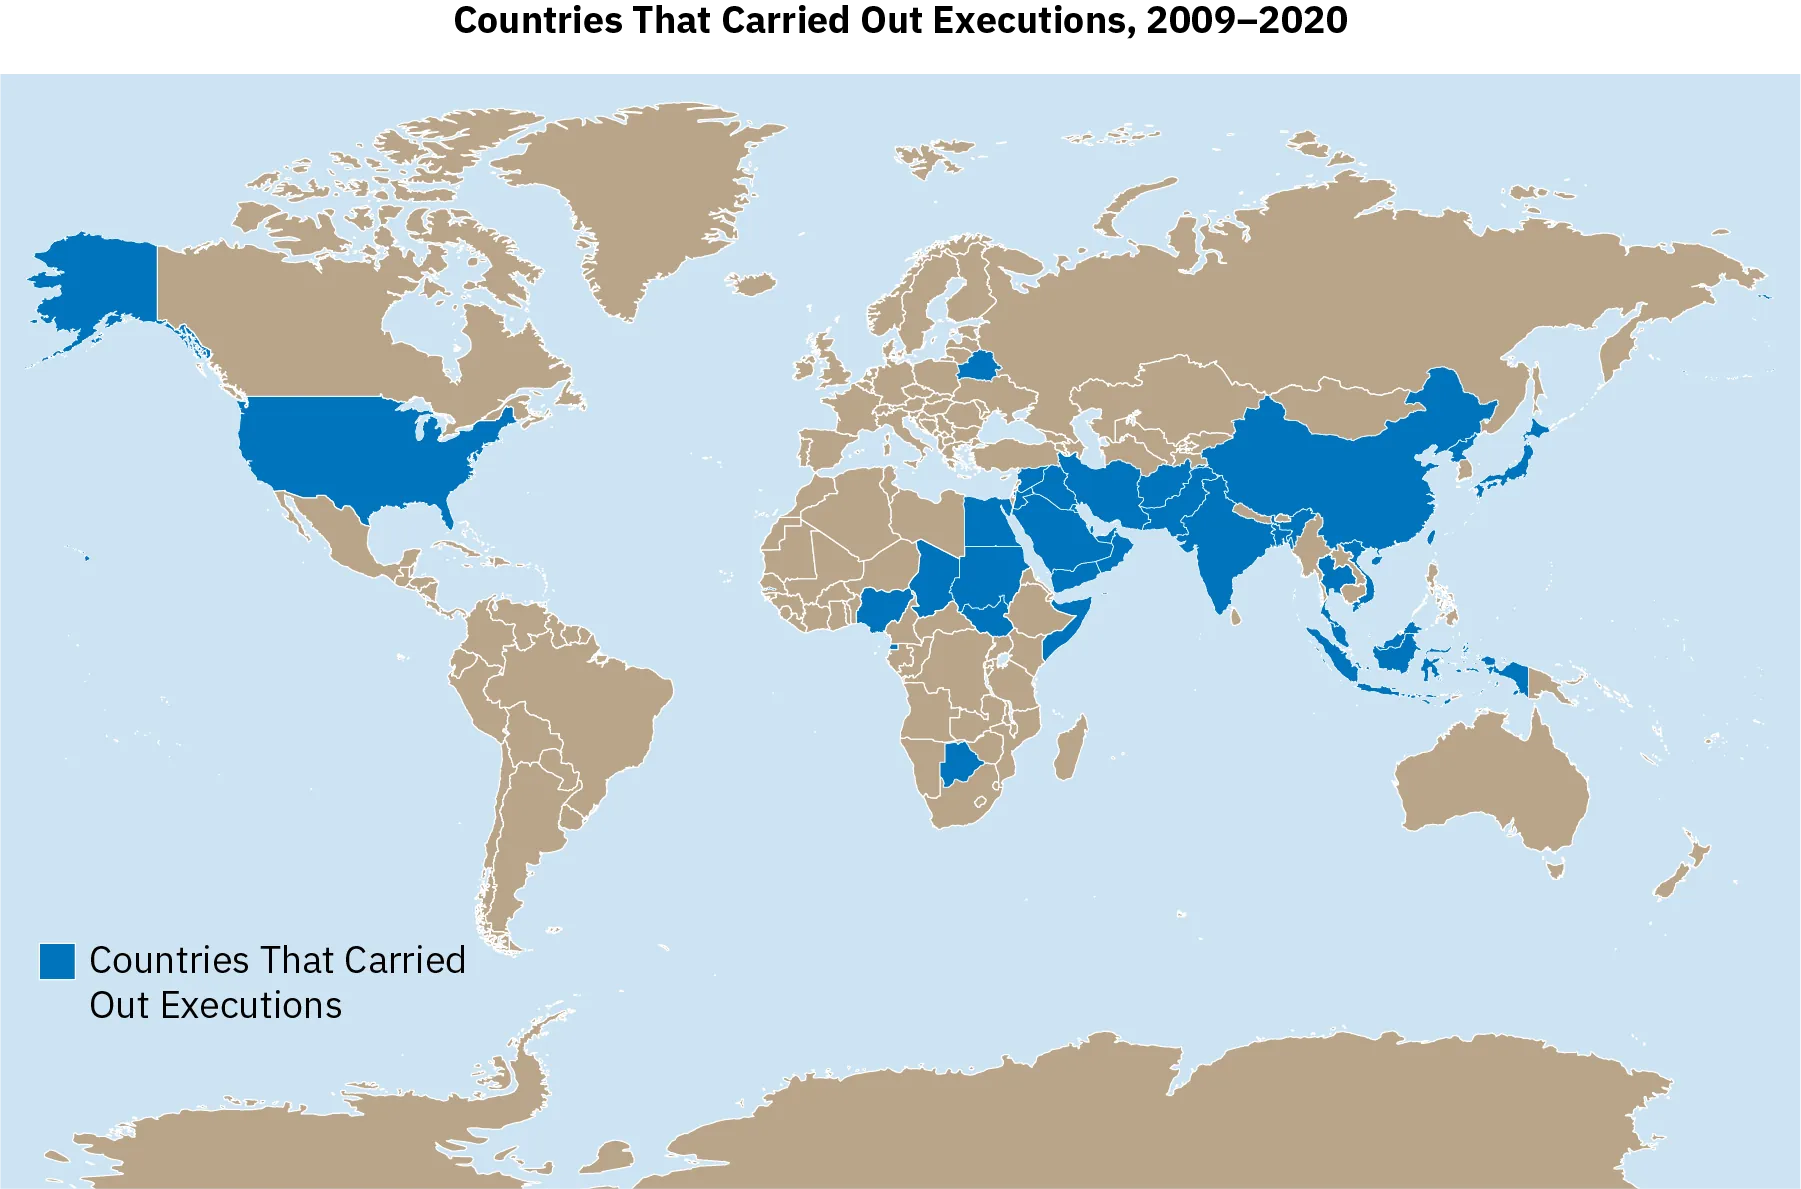 A world map shows all of the countries that carried out executions between 2009 and 2020. Most countries did not carry out executions during this timeframe.